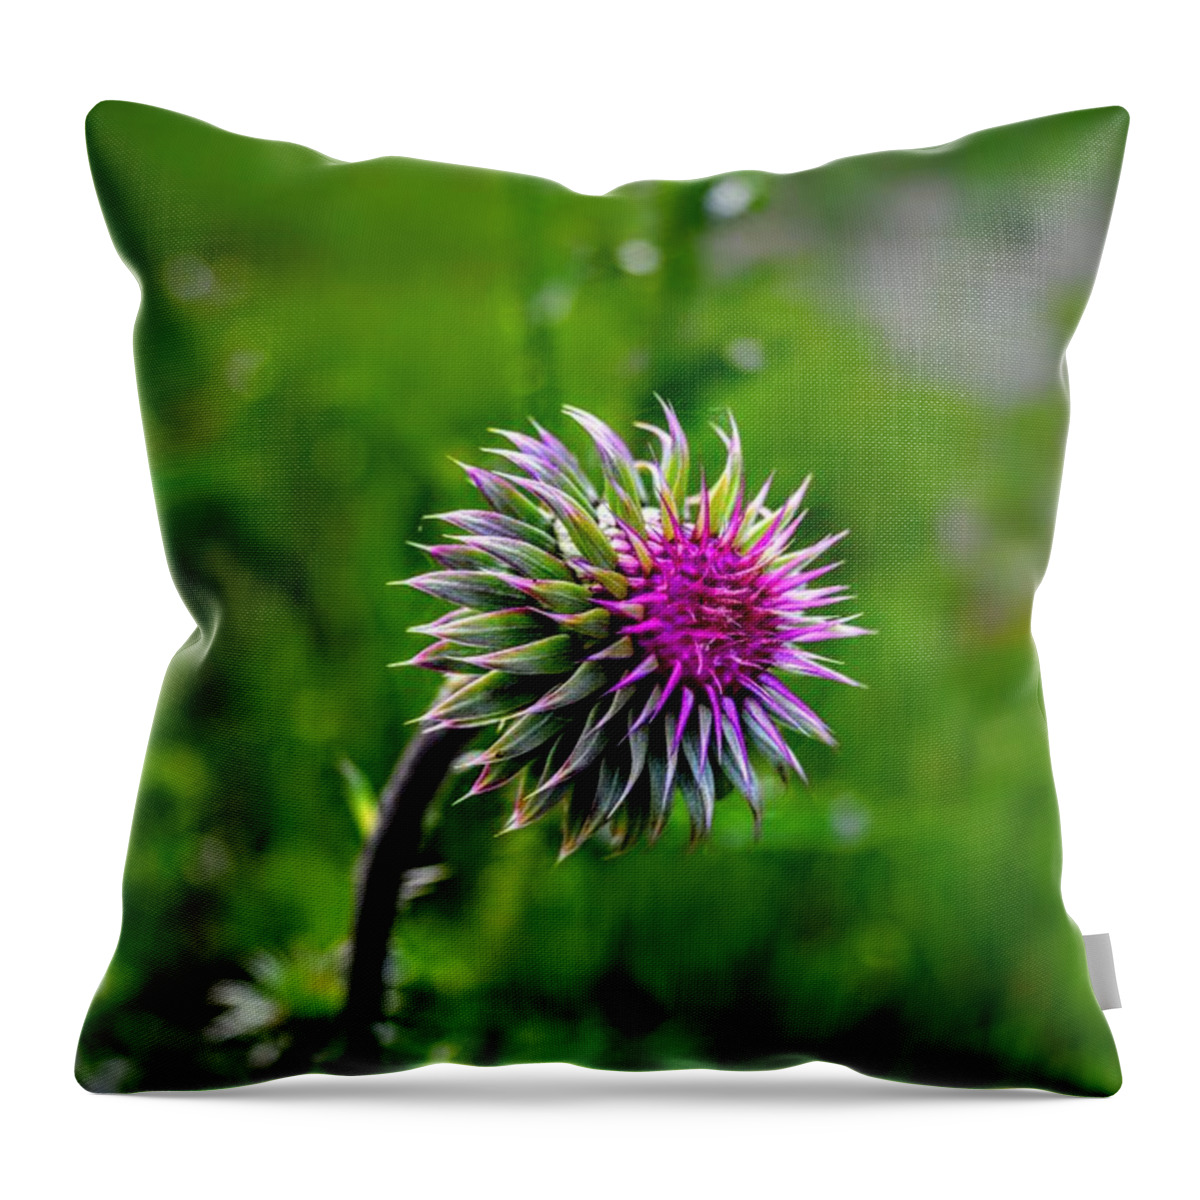 Thistle Throw Pillow featuring the photograph Meadow Majesty by Michael Brungardt